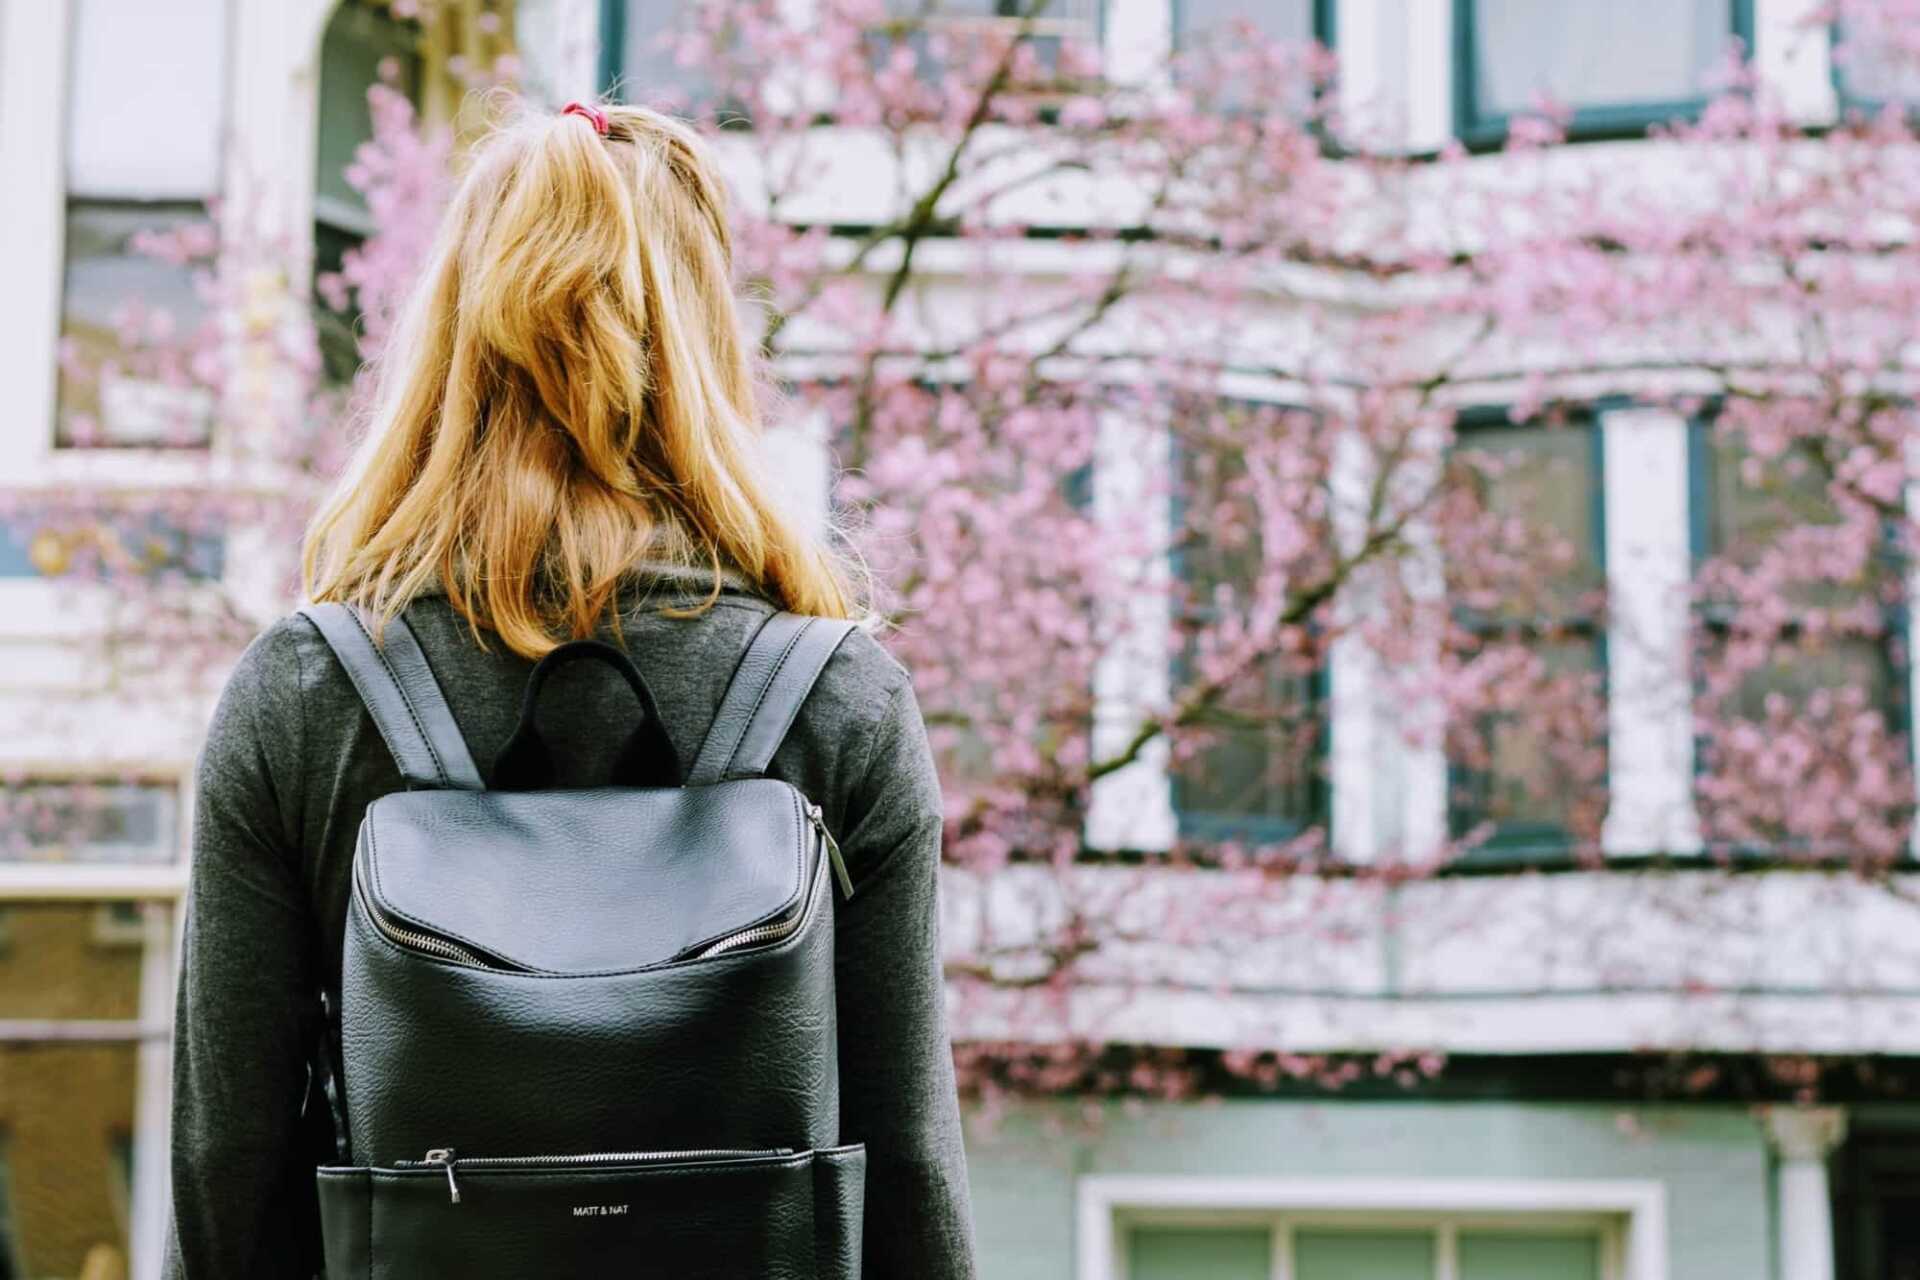 Blonde woman wearing a rucksack, seen from behind standing in front of a building and a cherry blossom tree